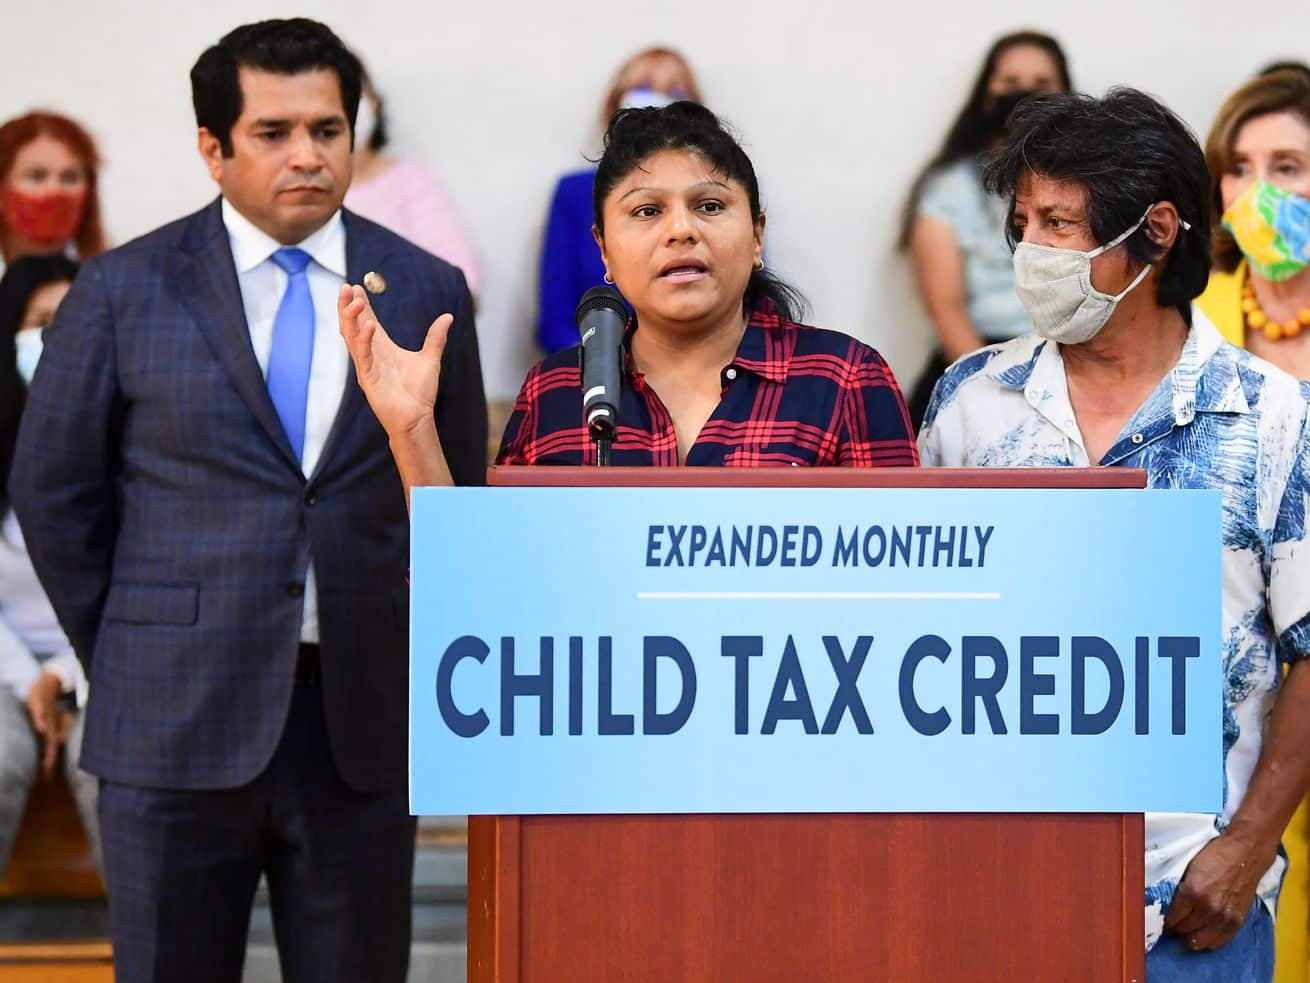 How to make the child tax credit more accessible